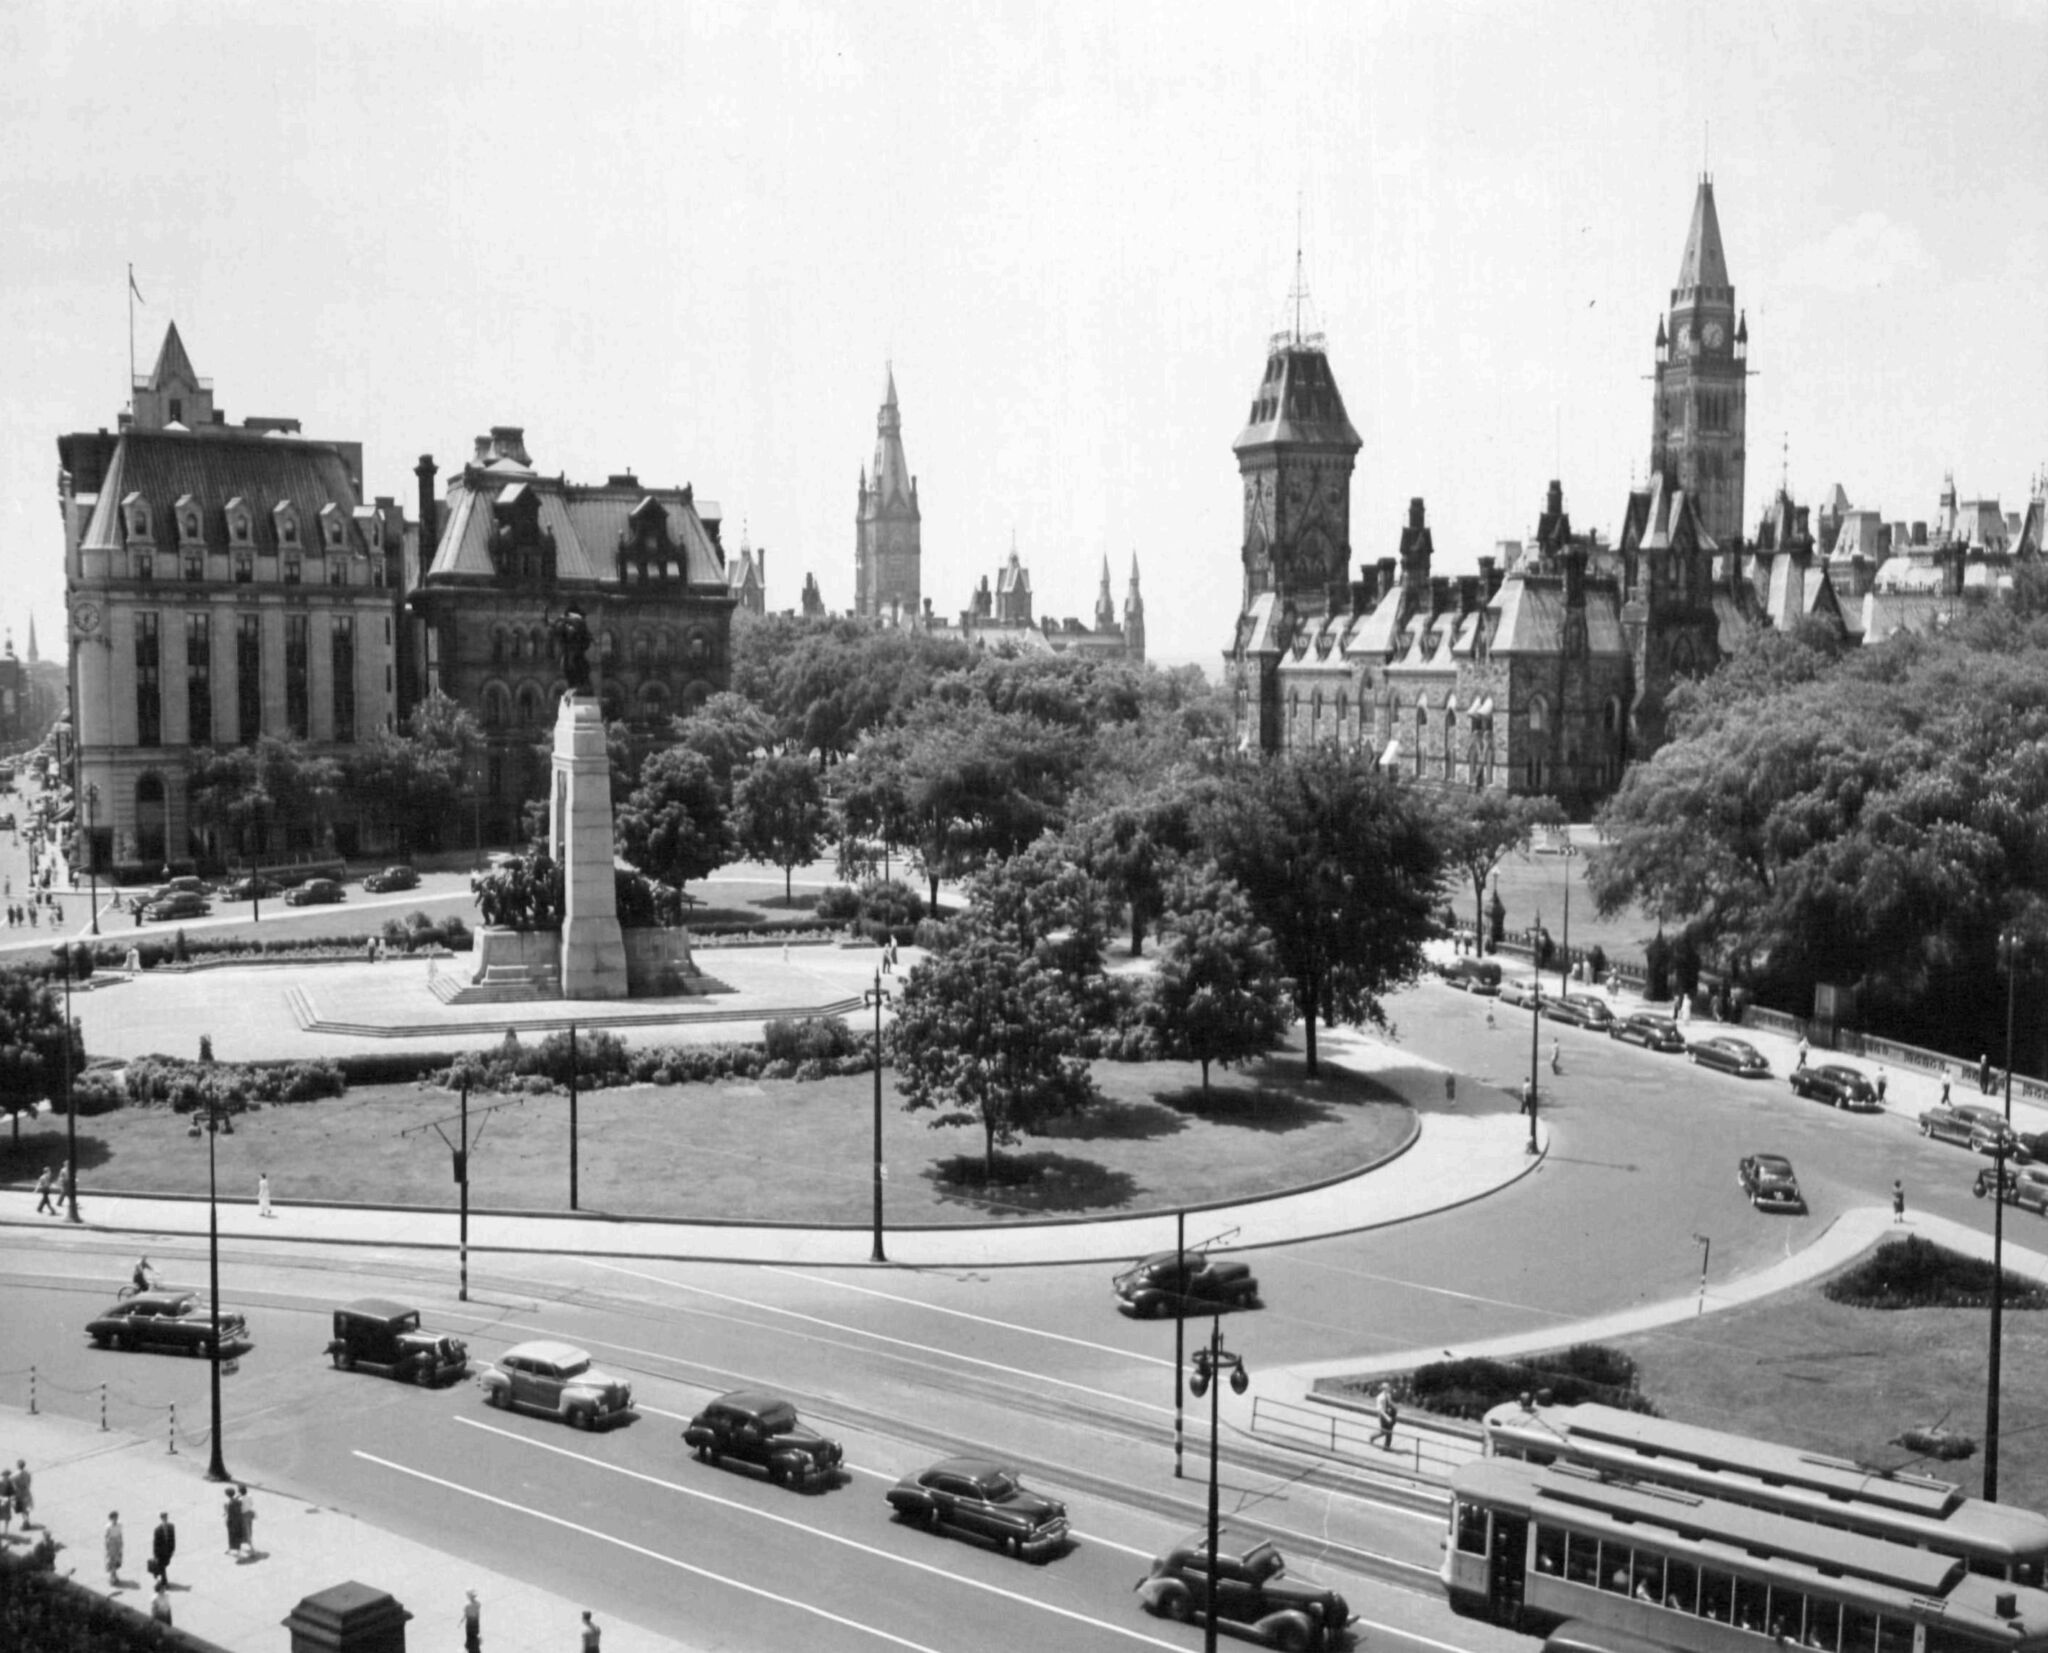 View of Confederation Square, the War Memorial, Parliament Hill buildings, Post Office, Langevin building, Ottawa, 1940s.